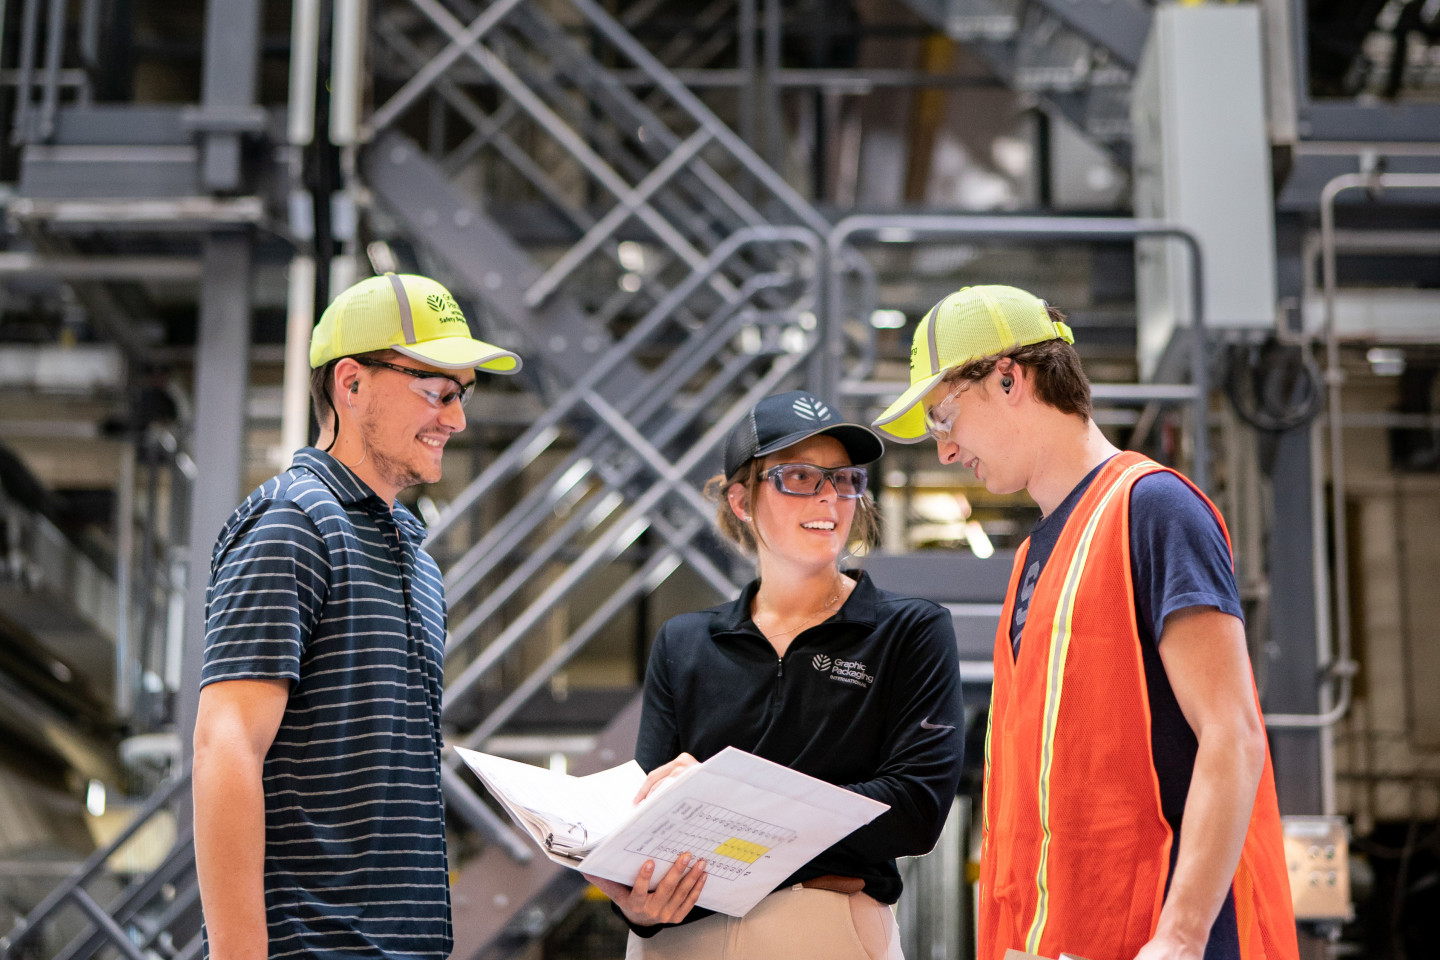 Hannah Kalleward holds a binder and talks with two other students wearing hard hats in an industrial setting.